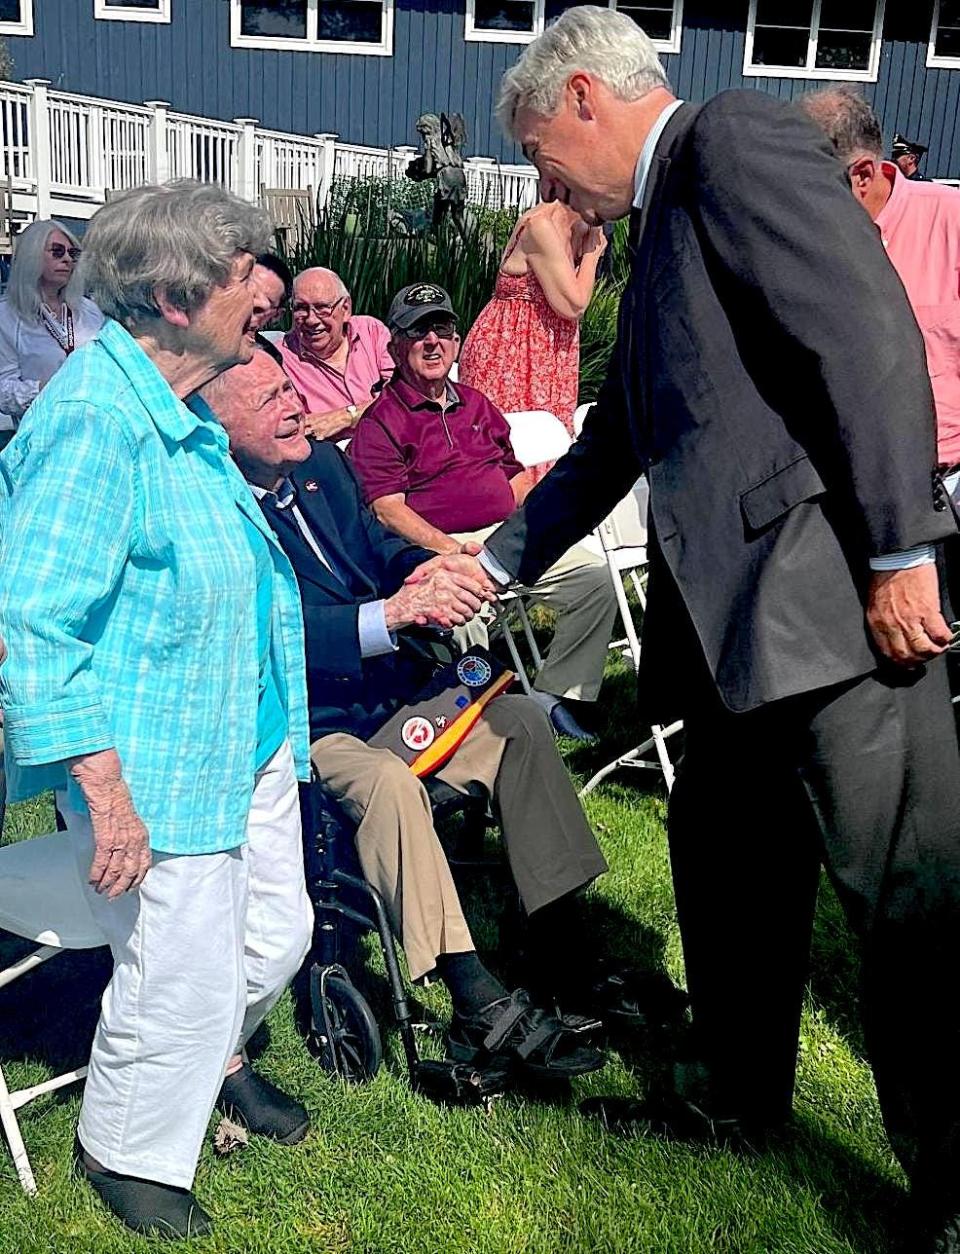 U.S. Sen. Sheldon Whitehouse, right, congratulates Army veteran Francis Marshall for his World War II service as Marshall’s wife, Lois, stands at left.